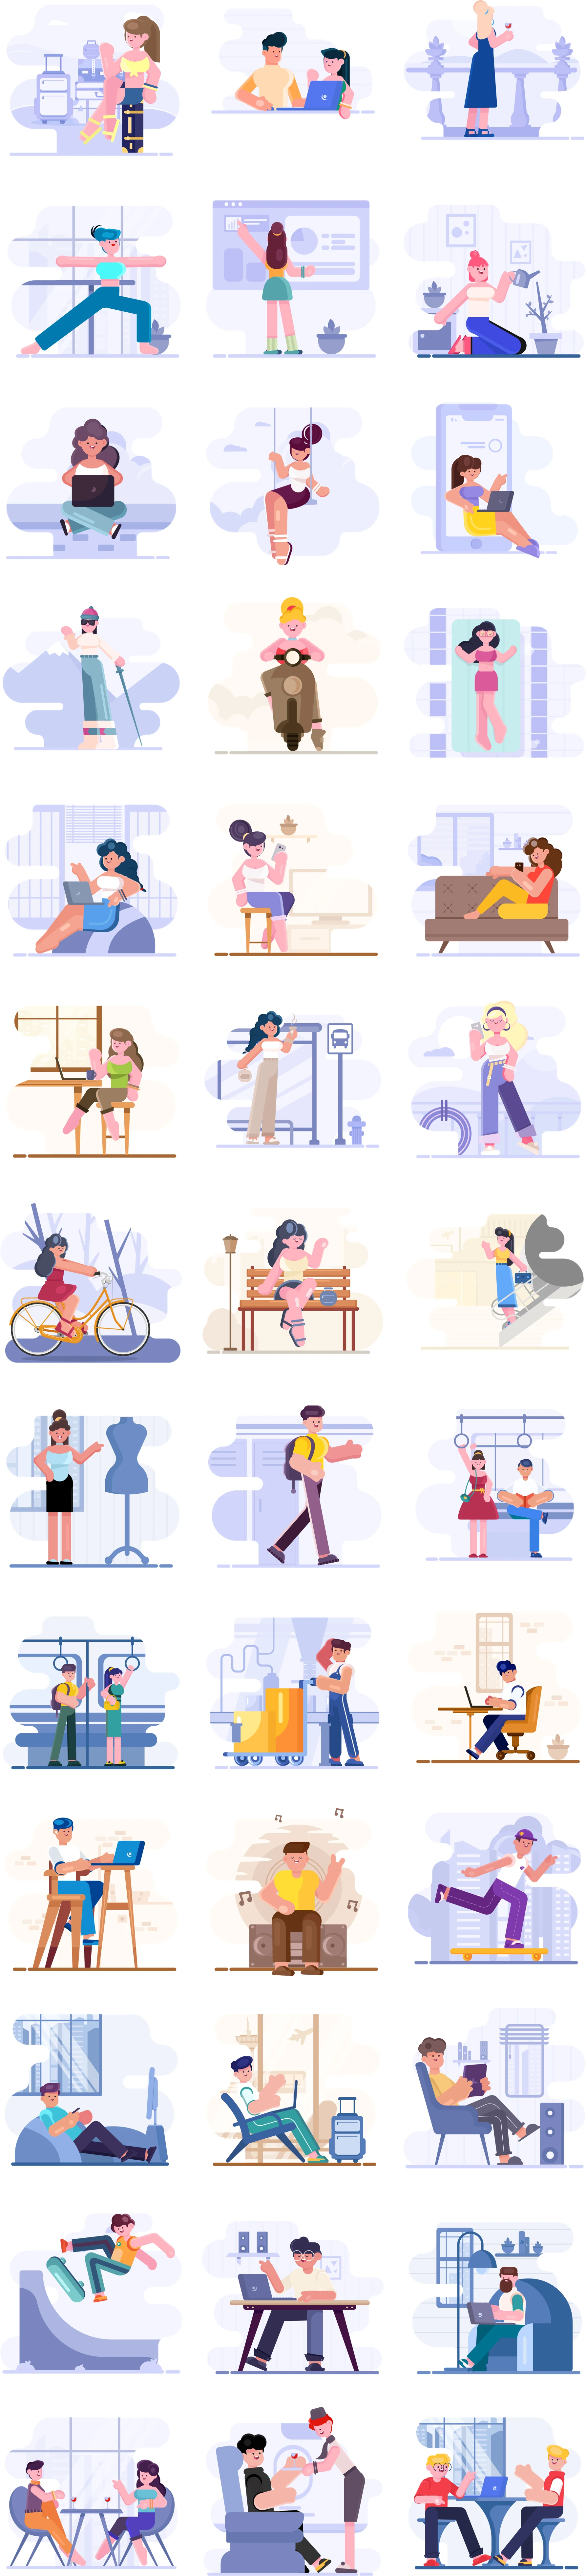 Loomies - 39 Free Illustrations - 39 free illustrations elements. Simplified cute characters illustrations for websites and application screens. If you’re looking for cute cartoony characters to tell your stories, look no further than our newest character illustrations